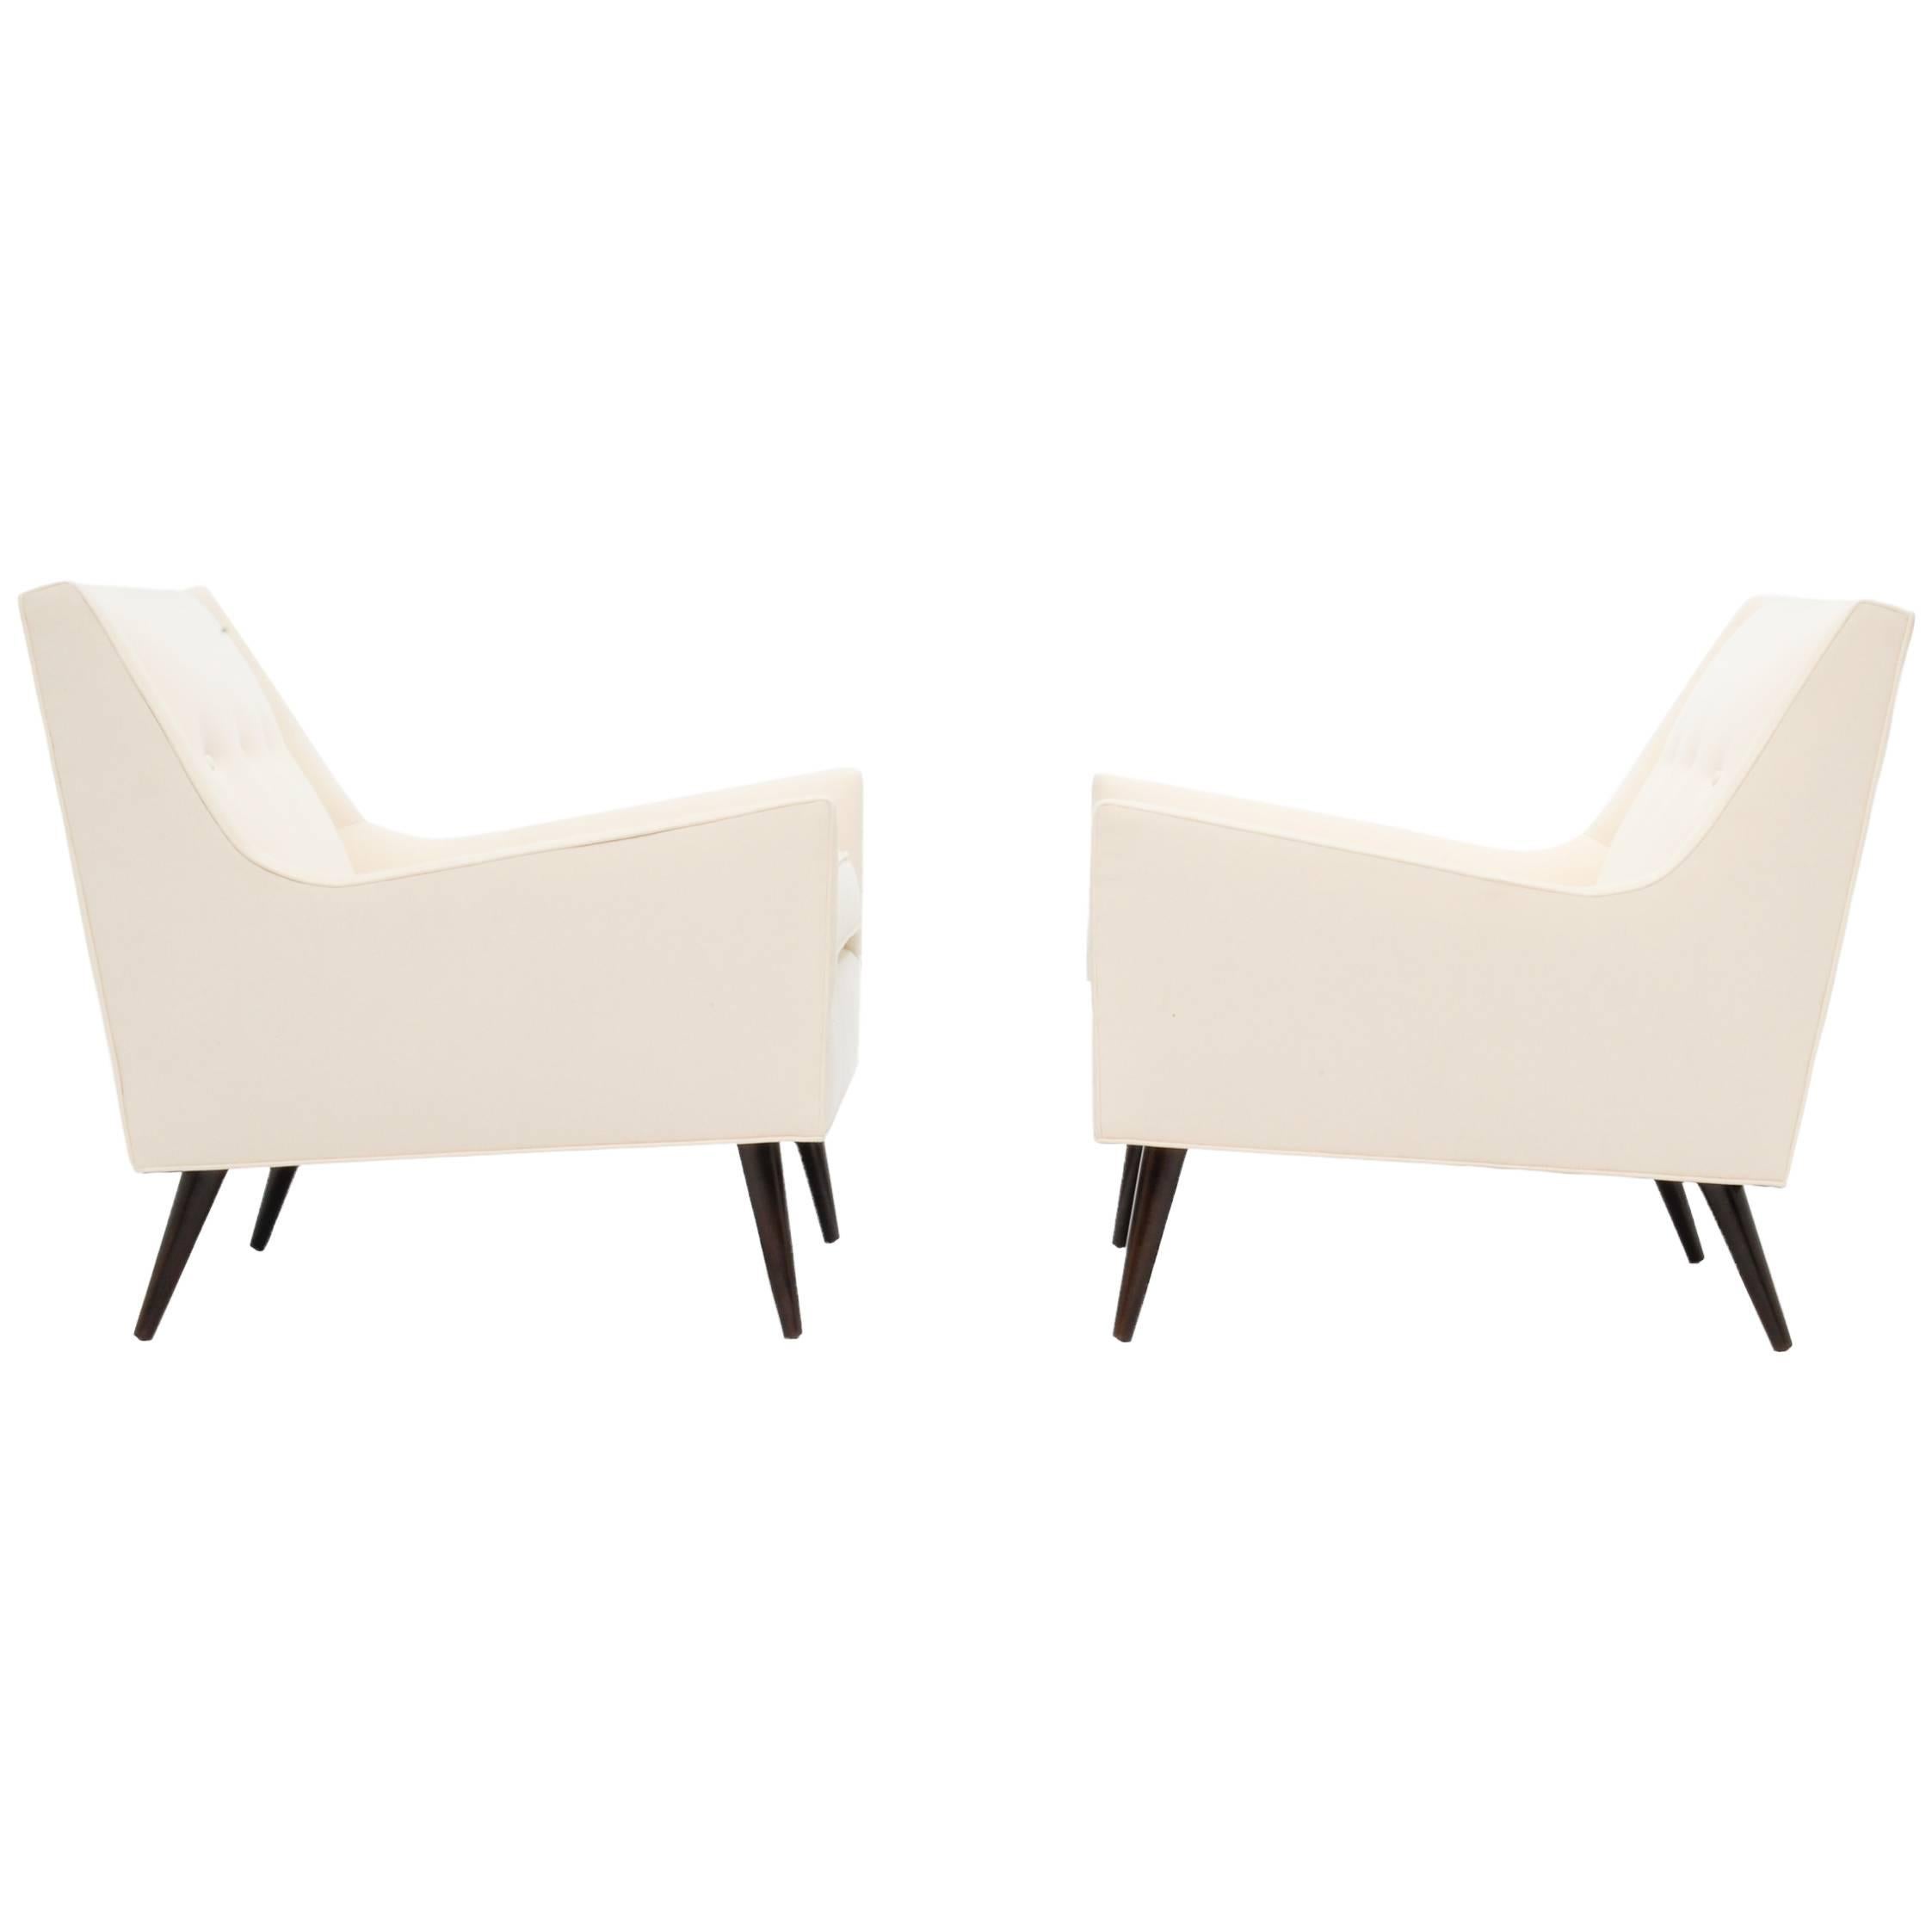 Pair of Milo Baughman Club Chairs with Elegant Lines and Style